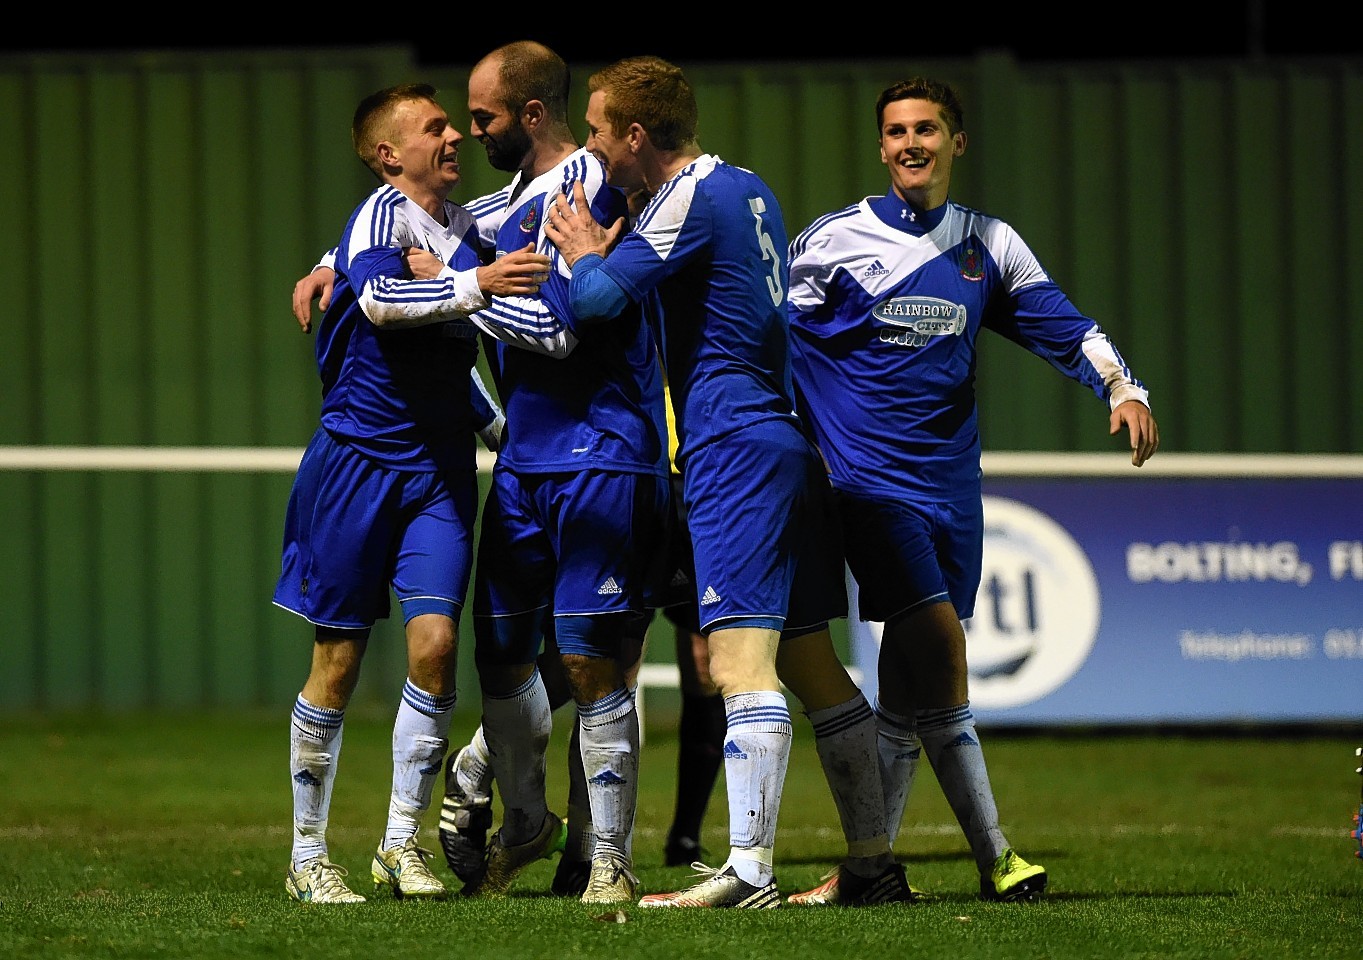 Daryl Nicol celebrates with team mates after scoring his spectacular overhead kick